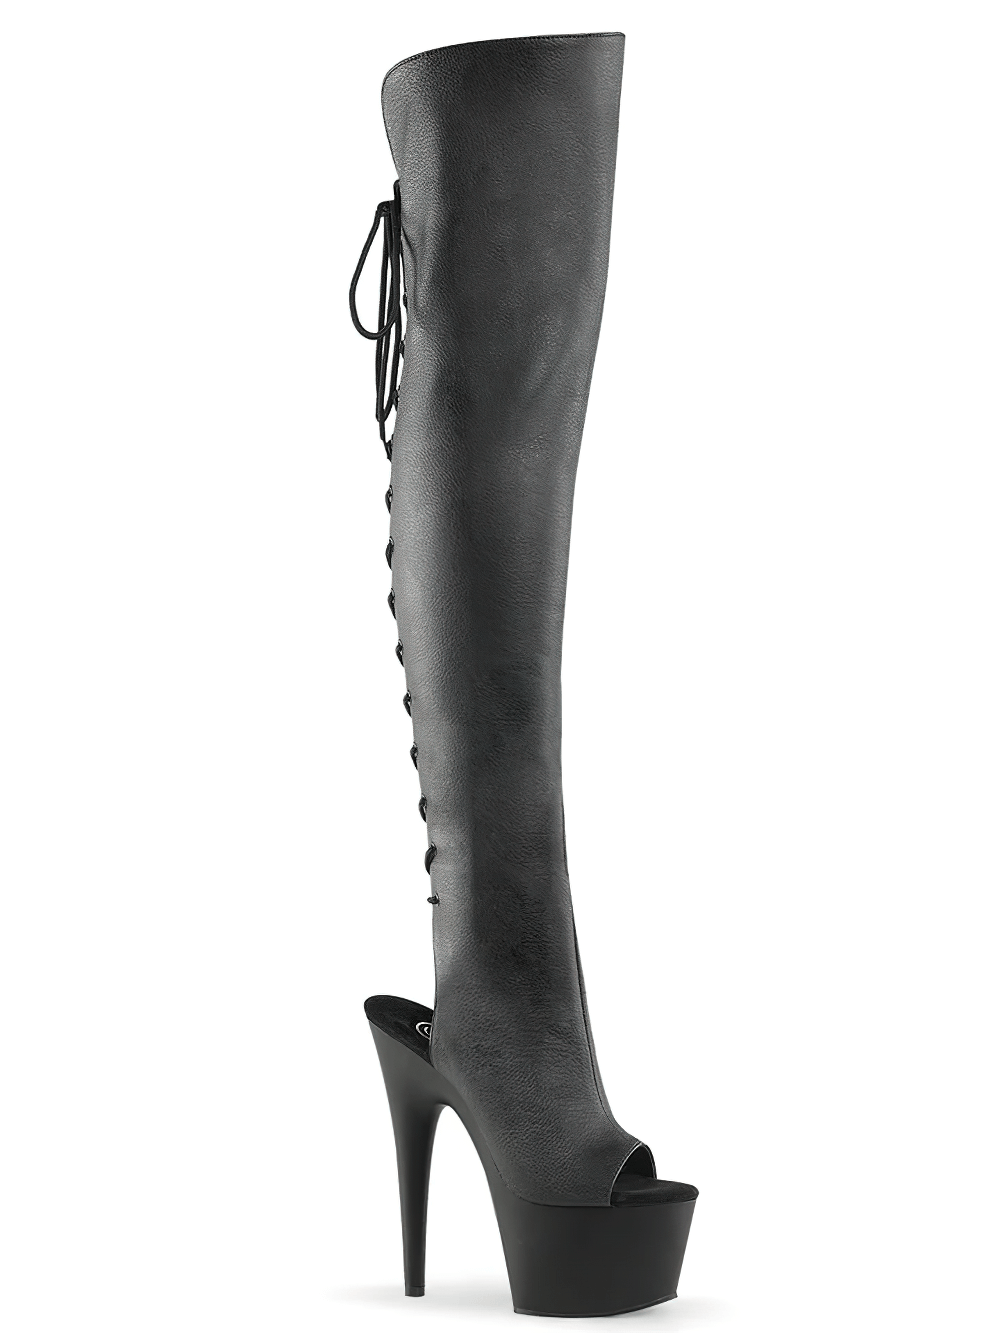 PLEASER Women's Stiletto Over-the-Knee Lace-Up Boots